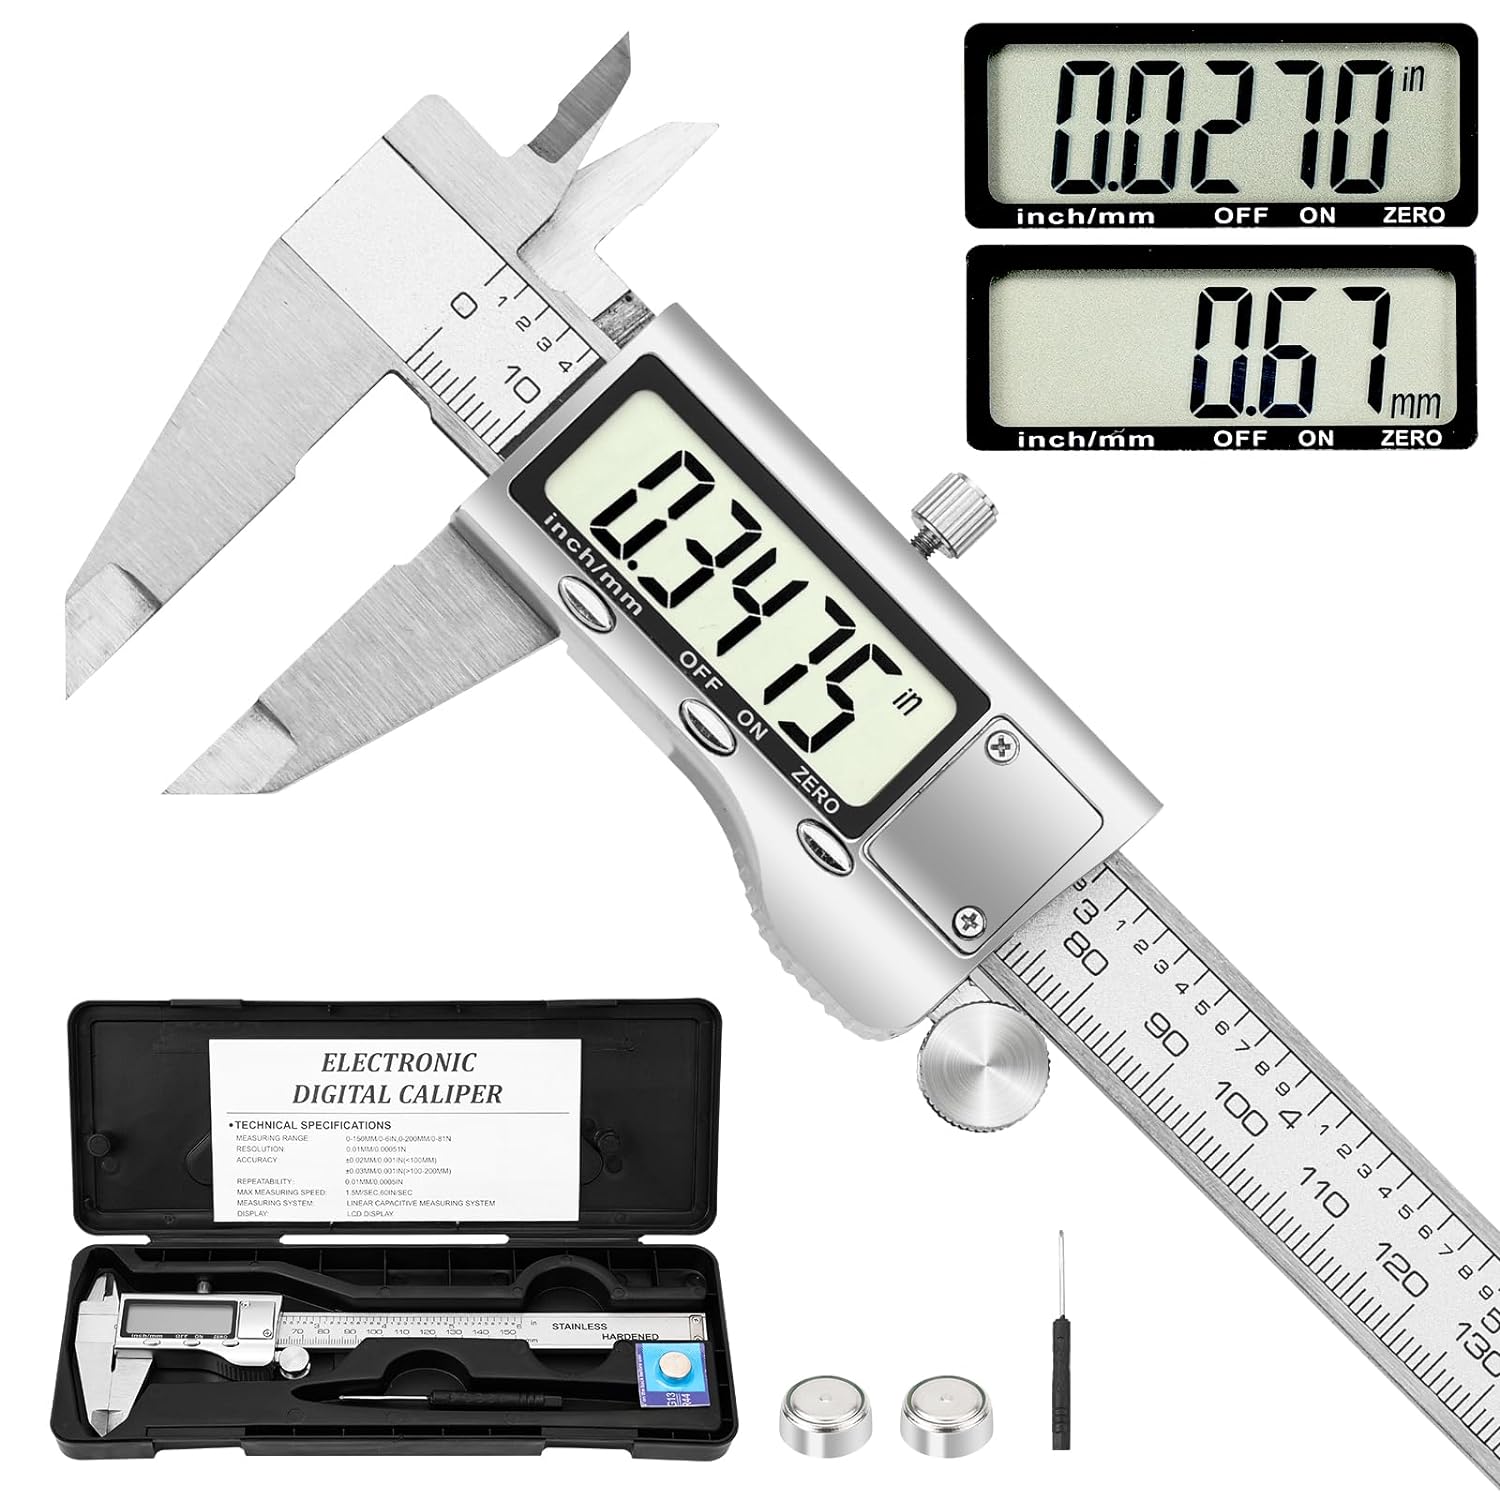 Digital Caliper Measuring Tool, 6 Inch Stainless Steel Vernier Caliper Digital Micrometer with Large LCD Screen, Auto-Off Feature, Easy Switch from Inch to Millimeter